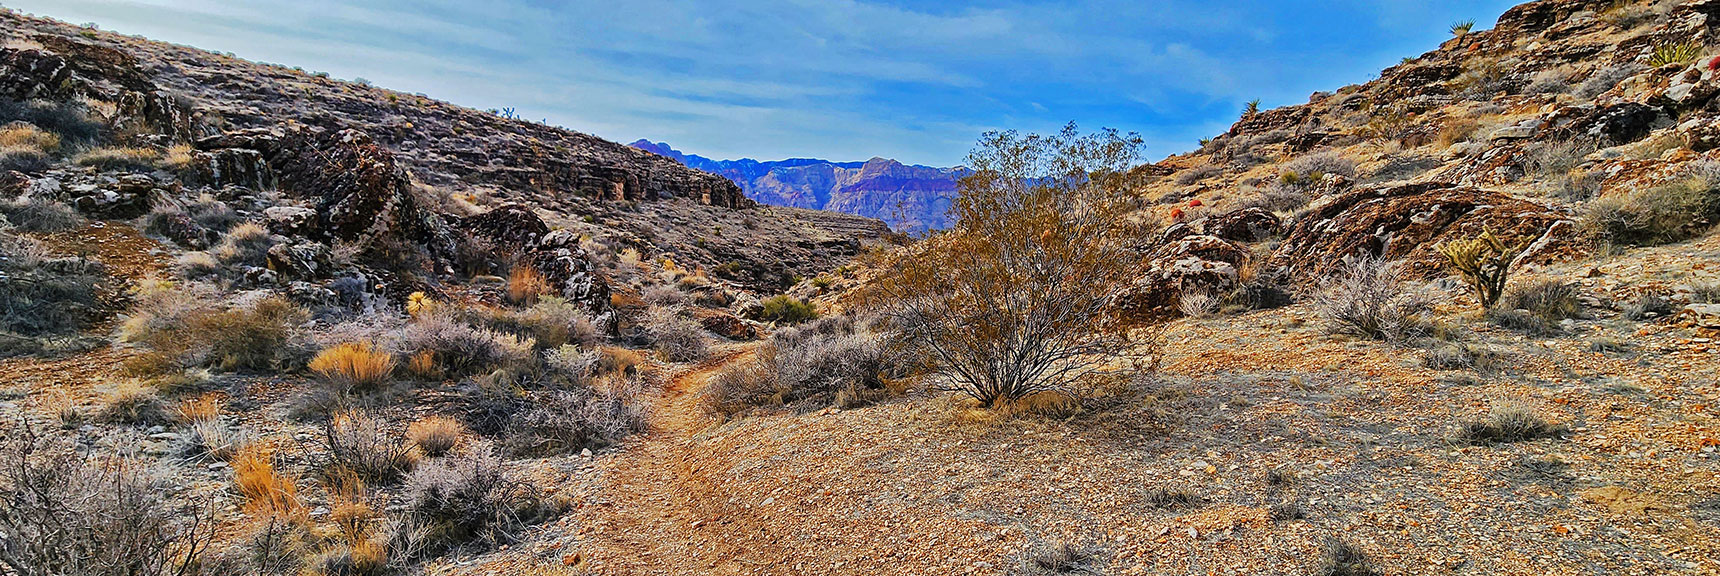 After Traversing Overlook Ridge, Now Descending into Skull Canyon | Western Outer Circuit | Blue Diamond Hill | Red Rock Canyon, Nevada